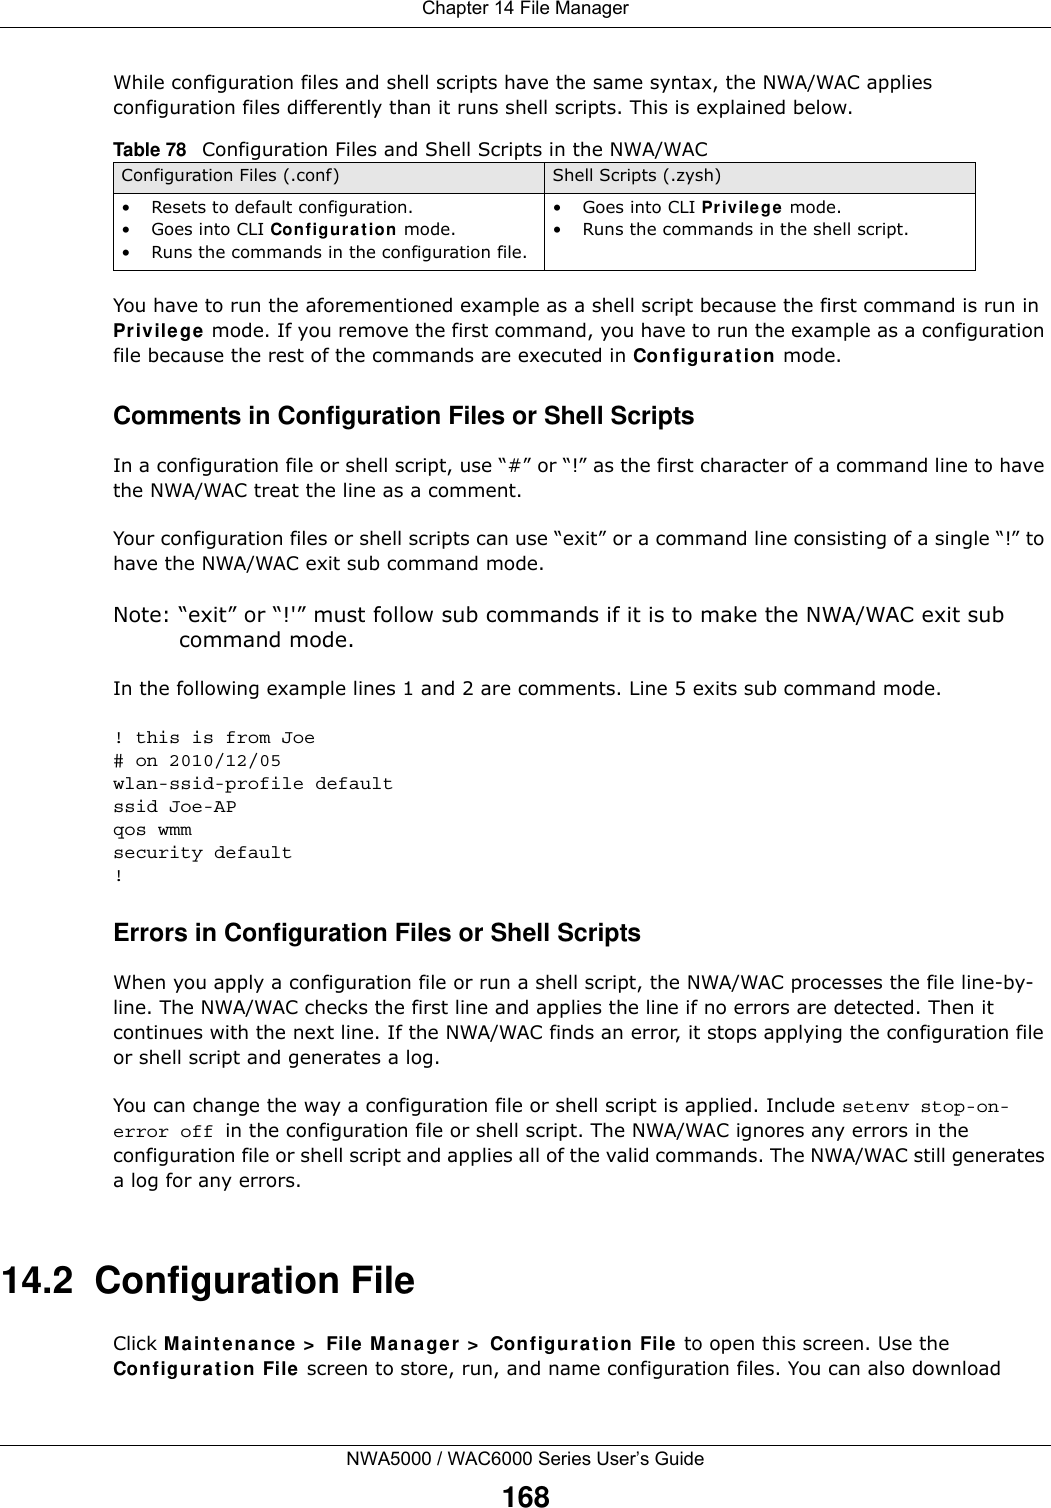 Chapter 14 File ManagerNWA5000 / WAC6000 Series User’s Guide168While configuration files and shell scripts have the same syntax, the NWA/WAC applies configuration files differently than it runs shell scripts. This is explained below.You have to run the aforementioned example as a shell script because the first command is run in Pr iv ilege mode. If you remove the first command, you have to run the example as a configuration file because the rest of the commands are executed in Con fig ura t ion mode.Comments in Configuration Files or Shell ScriptsIn a configuration file or shell script, use “#” or “!” as the first character of a command line to have the NWA/WAC treat the line as a comment. Your configuration files or shell scripts can use “exit” or a command line consisting of a single “!” to have the NWA/WAC exit sub command mode.Note: “exit” or “!&apos;” must follow sub commands if it is to make the NWA/WAC exit sub command mode.In the following example lines 1 and 2 are comments. Line 5 exits sub command mode. ! this is from Joe# on 2010/12/05wlan-ssid-profile defaultssid Joe-APqos wmmsecurity default!Errors in Configuration Files or Shell ScriptsWhen you apply a configuration file or run a shell script, the NWA/WAC processes the file line-by-line. The NWA/WAC checks the first line and applies the line if no errors are detected. Then it continues with the next line. If the NWA/WAC finds an error, it stops applying the configuration file or shell script and generates a log. You can change the way a configuration file or shell script is applied. Include setenv stop-on-error off in the configuration file or shell script. The NWA/WAC ignores any errors in the configuration file or shell script and applies all of the valid commands. The NWA/WAC still generates a log for any errors. 14.2  Configuration FileClick M ainte nan ce  &gt;  File Man ager  &gt;  Configura tion  File to open this screen. Use the Configur at ion File screen to store, run, and name configuration files. You can also download Table 78   Configuration Files and Shell Scripts in the NWA/WACConfiguration Files (.conf) Shell Scripts (.zysh)• Resets to default configuration.•Goes into CLI Co nf ig ura t io n mode.• Runs the commands in the configuration file.•Goes into CLI Pr ivilege mode.• Runs the commands in the shell script.